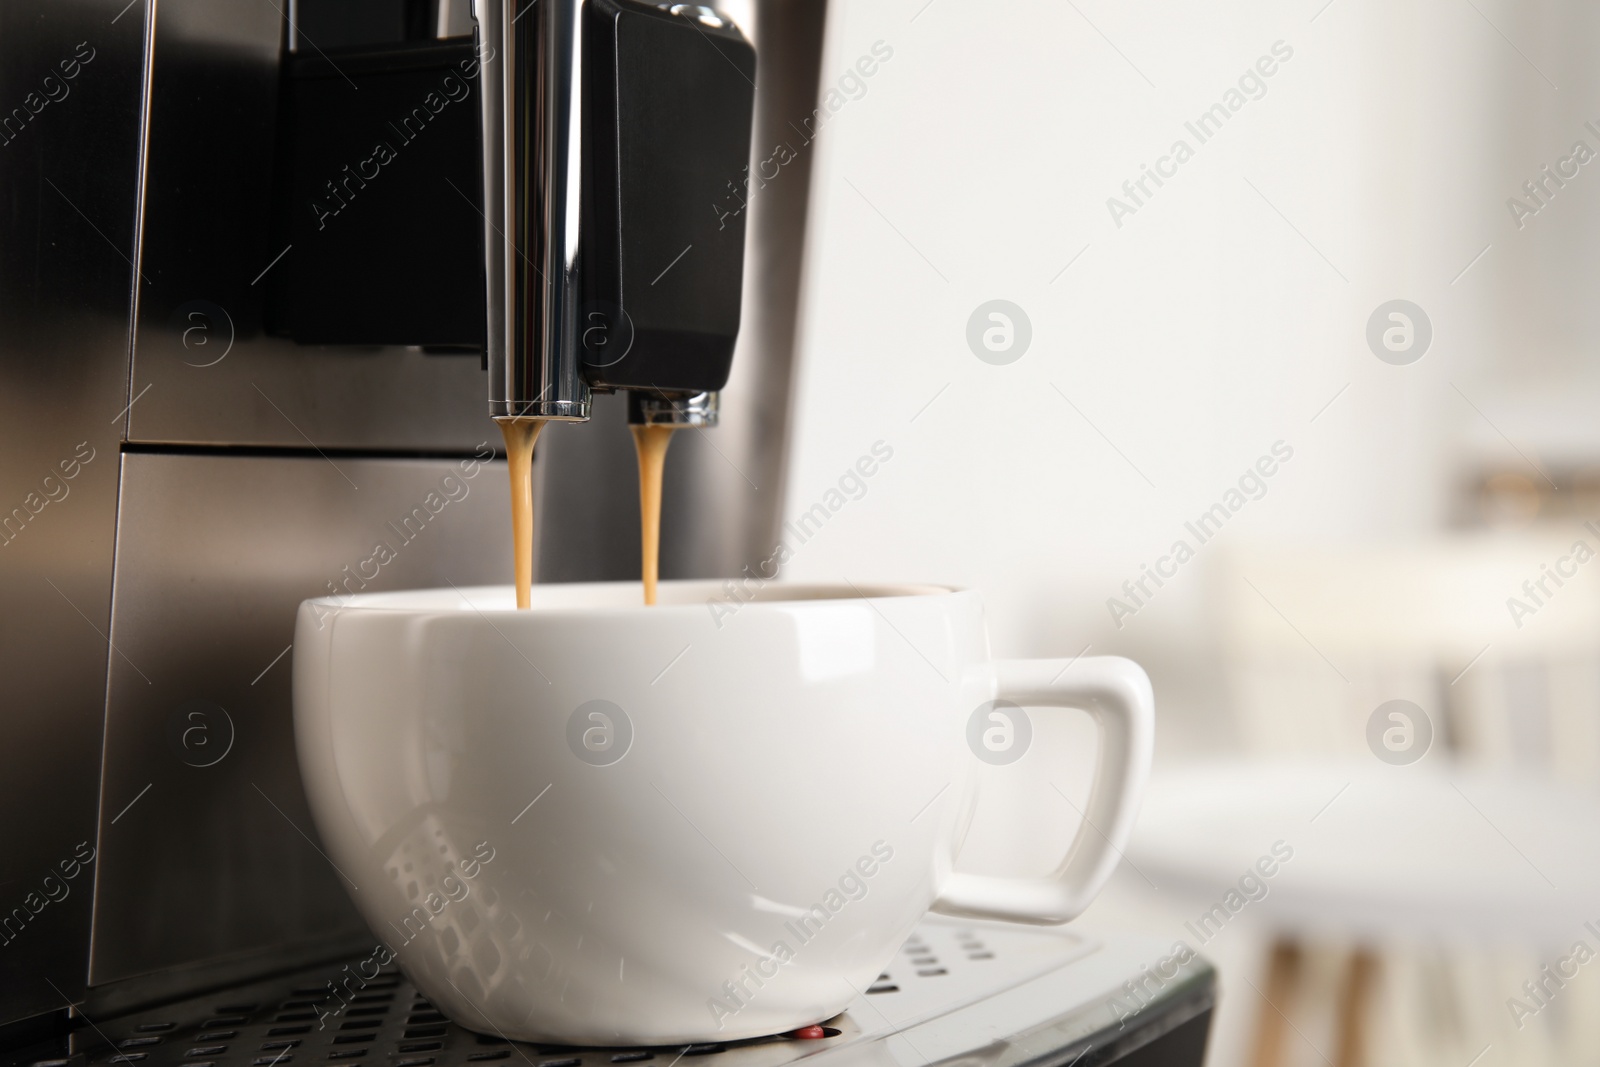 Photo of Espresso machine pouring coffee into cup against blurred background, closeup. Space for text